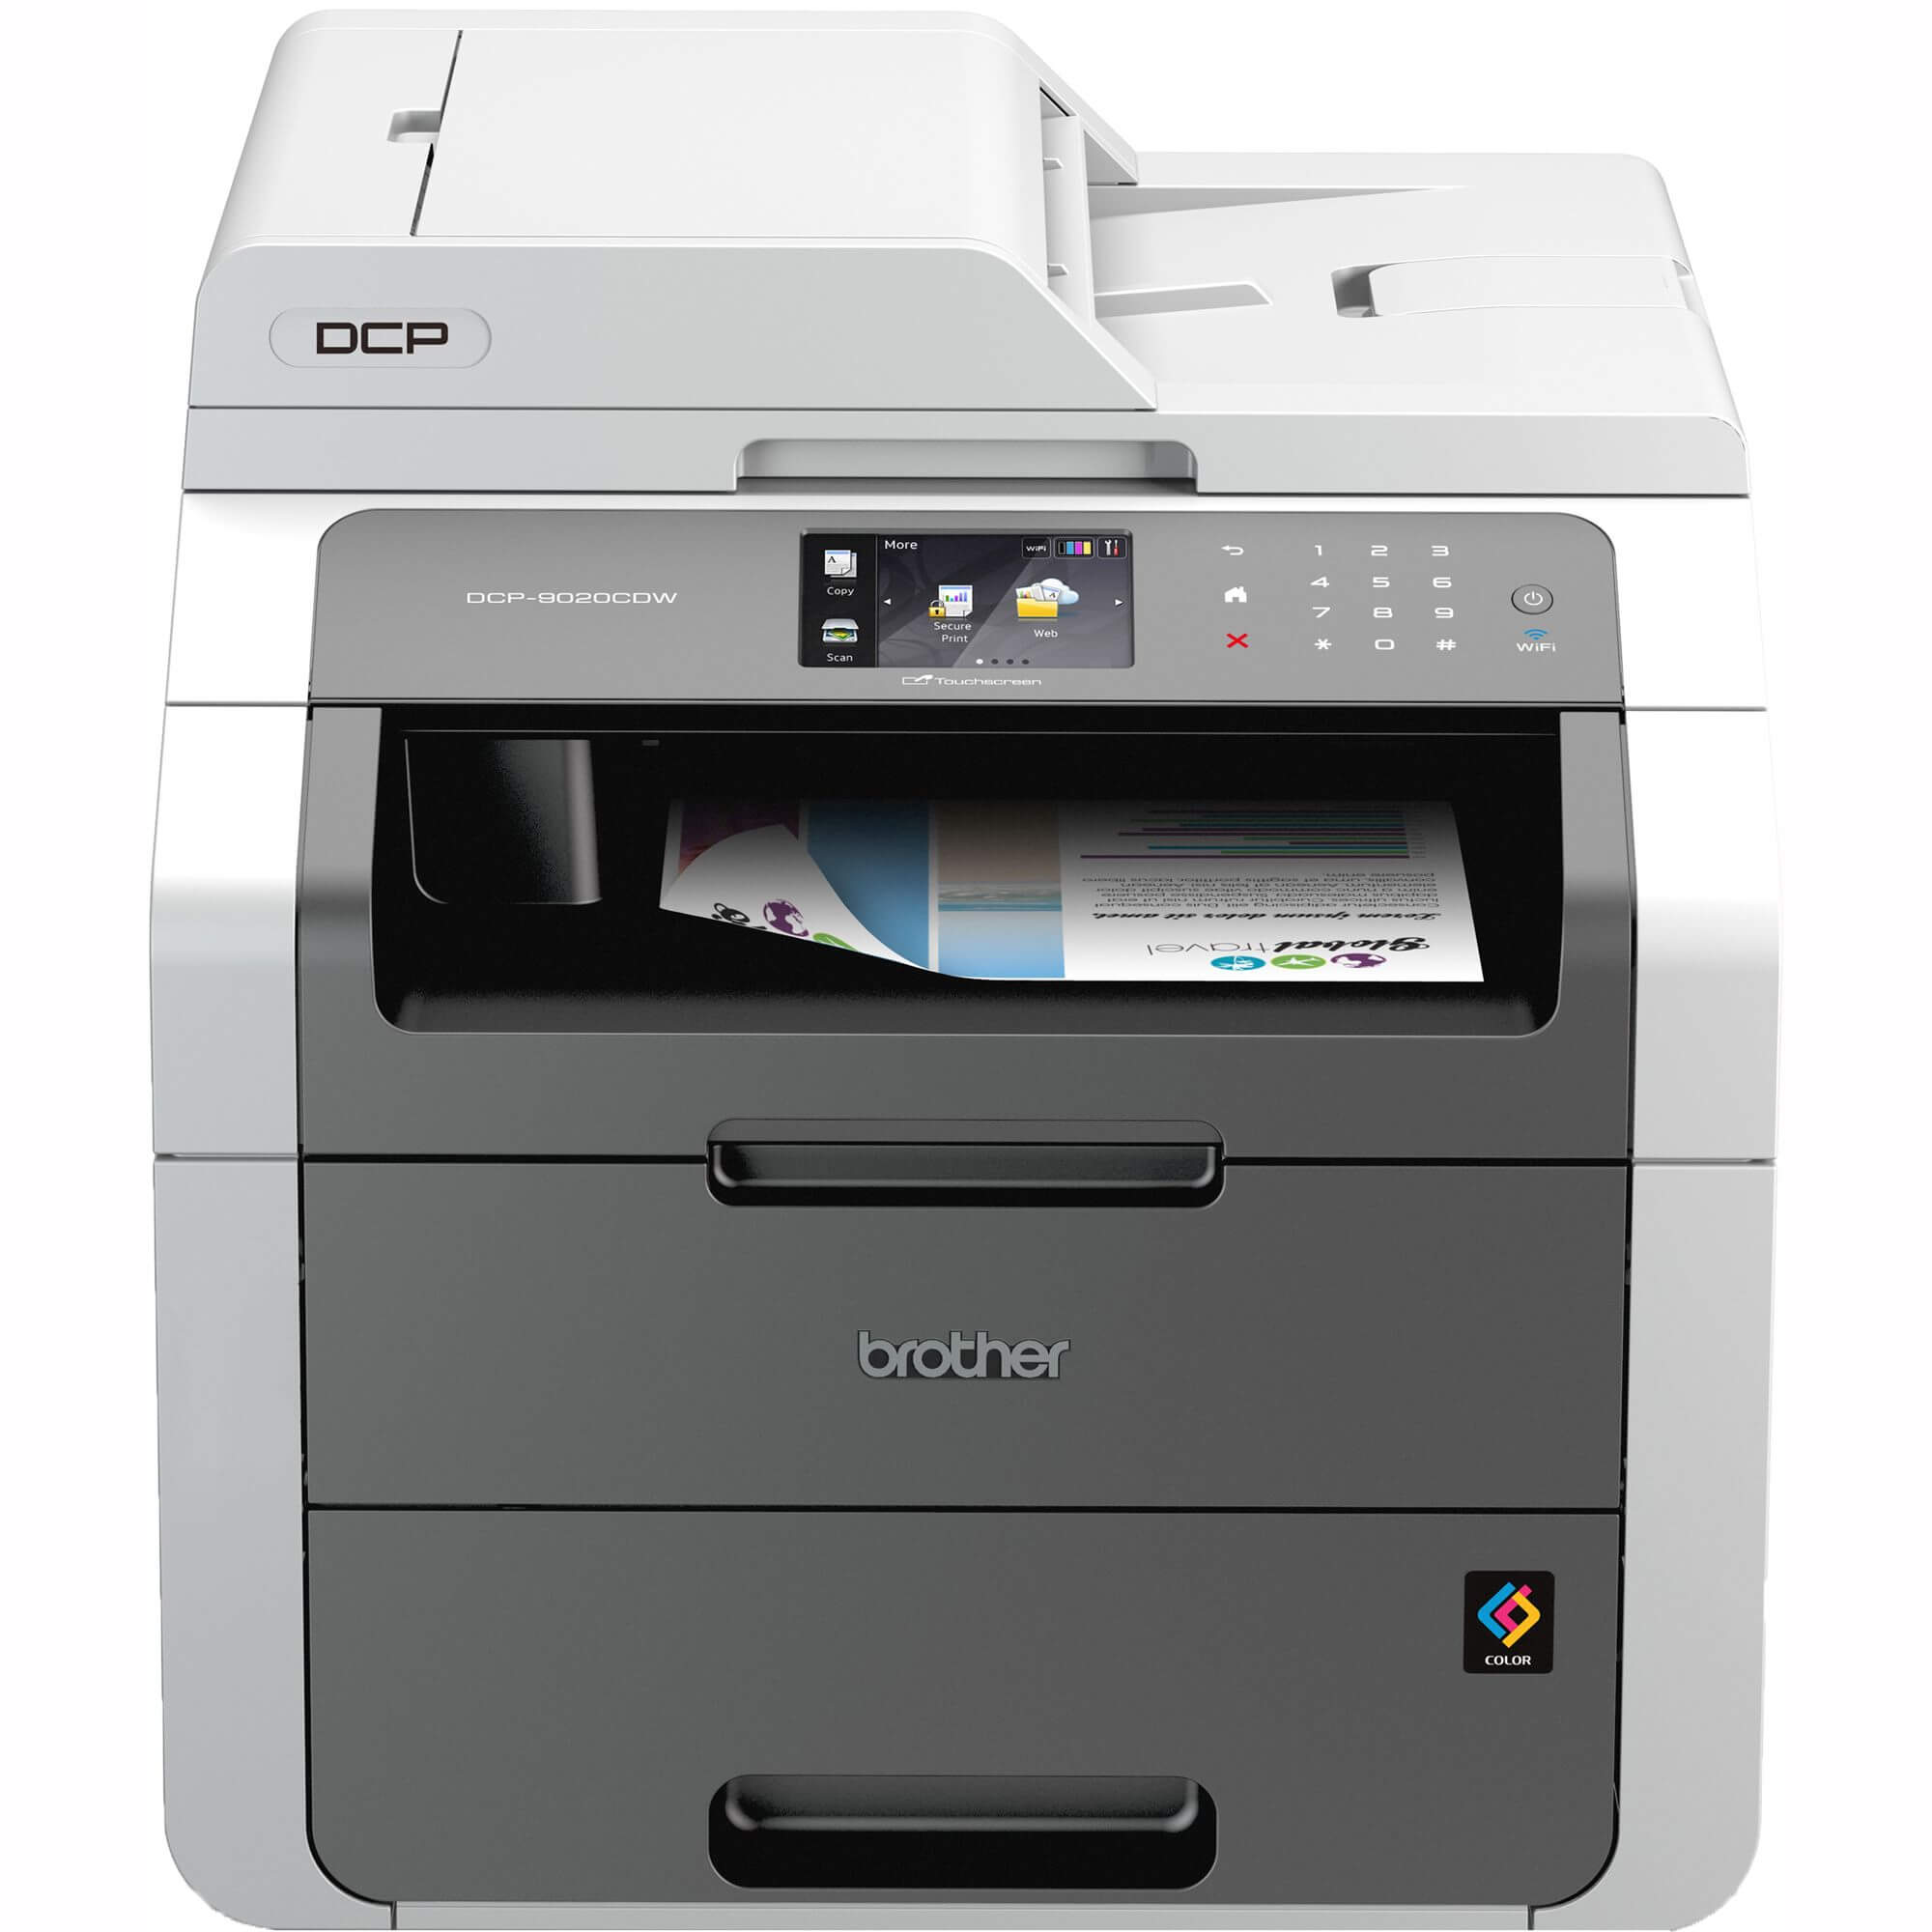  Multifunctional laser Brother DCP9020CDW, Color, A4 